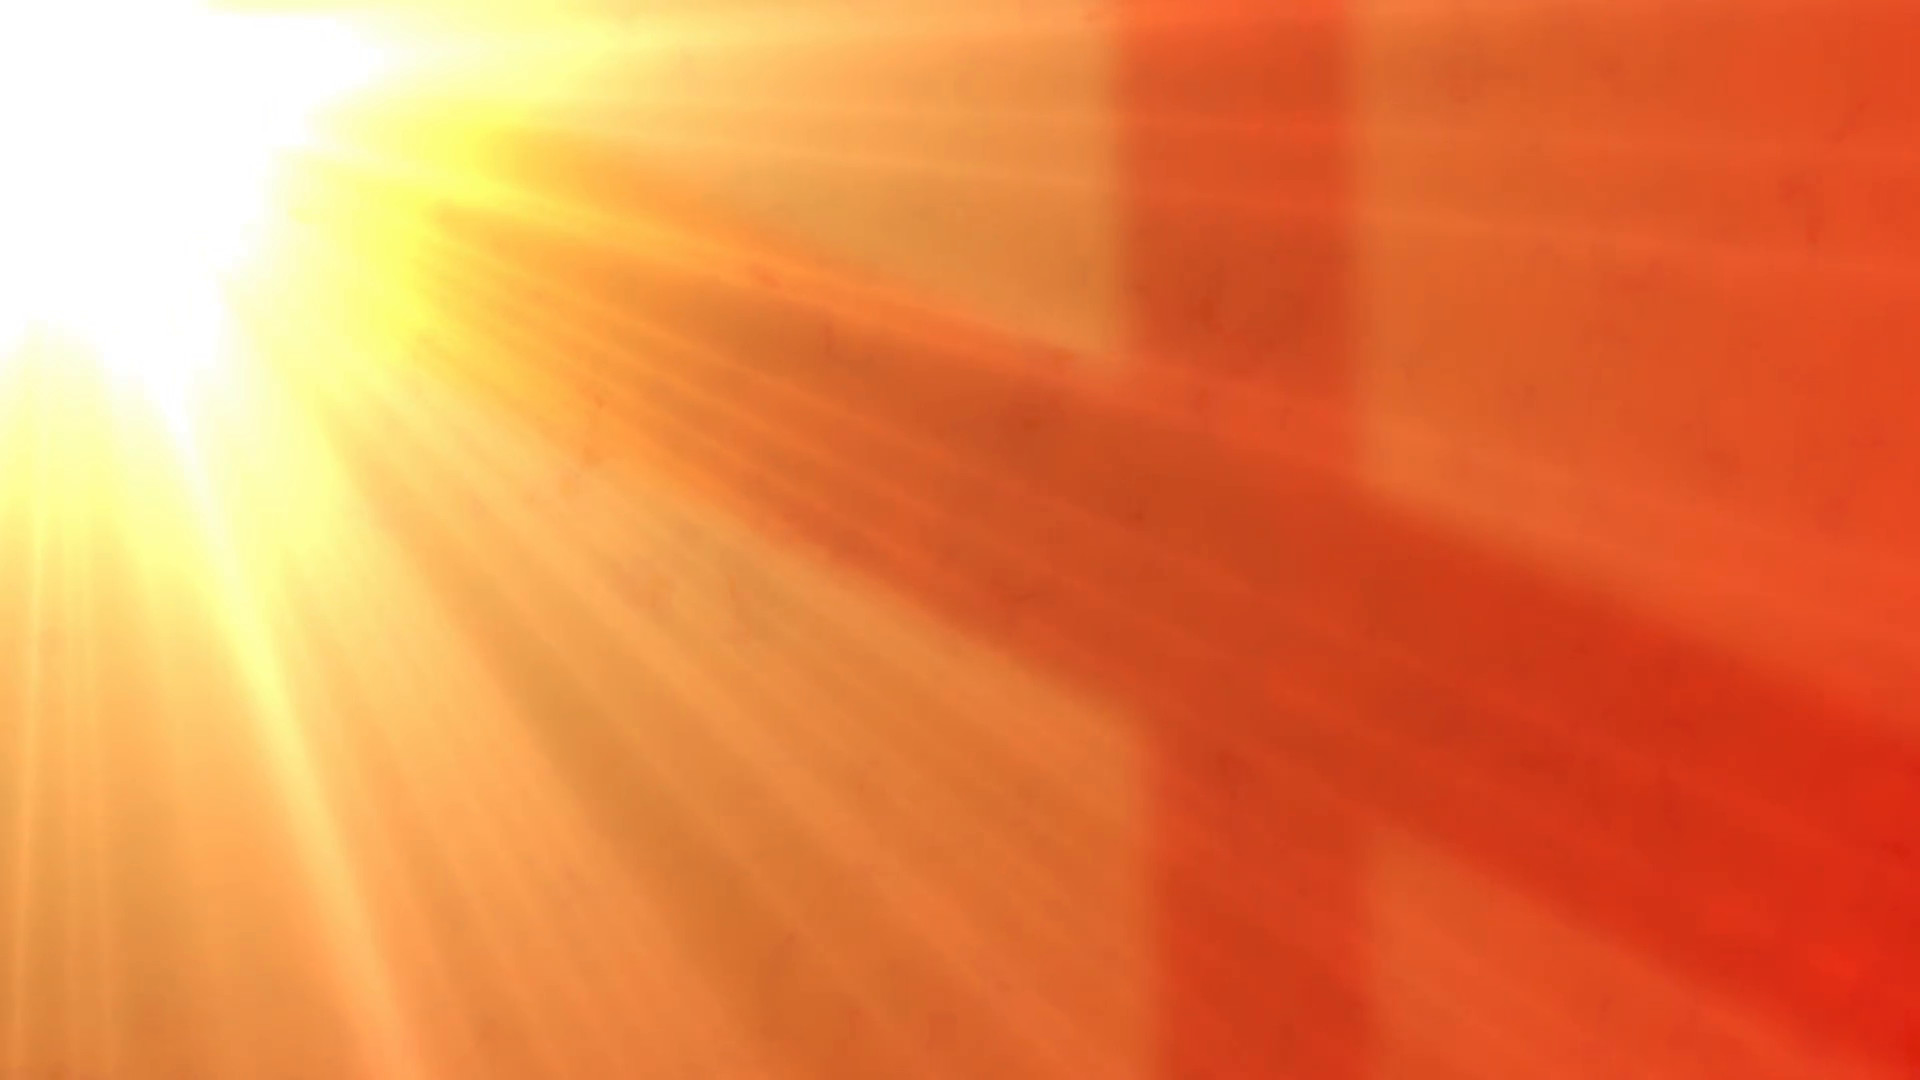 1920x1080 Christian - Religious Background - Orange/Yellow - Sunset/rise with cross  silhouette on clouds - Loop Motion Background - VideoBlocks